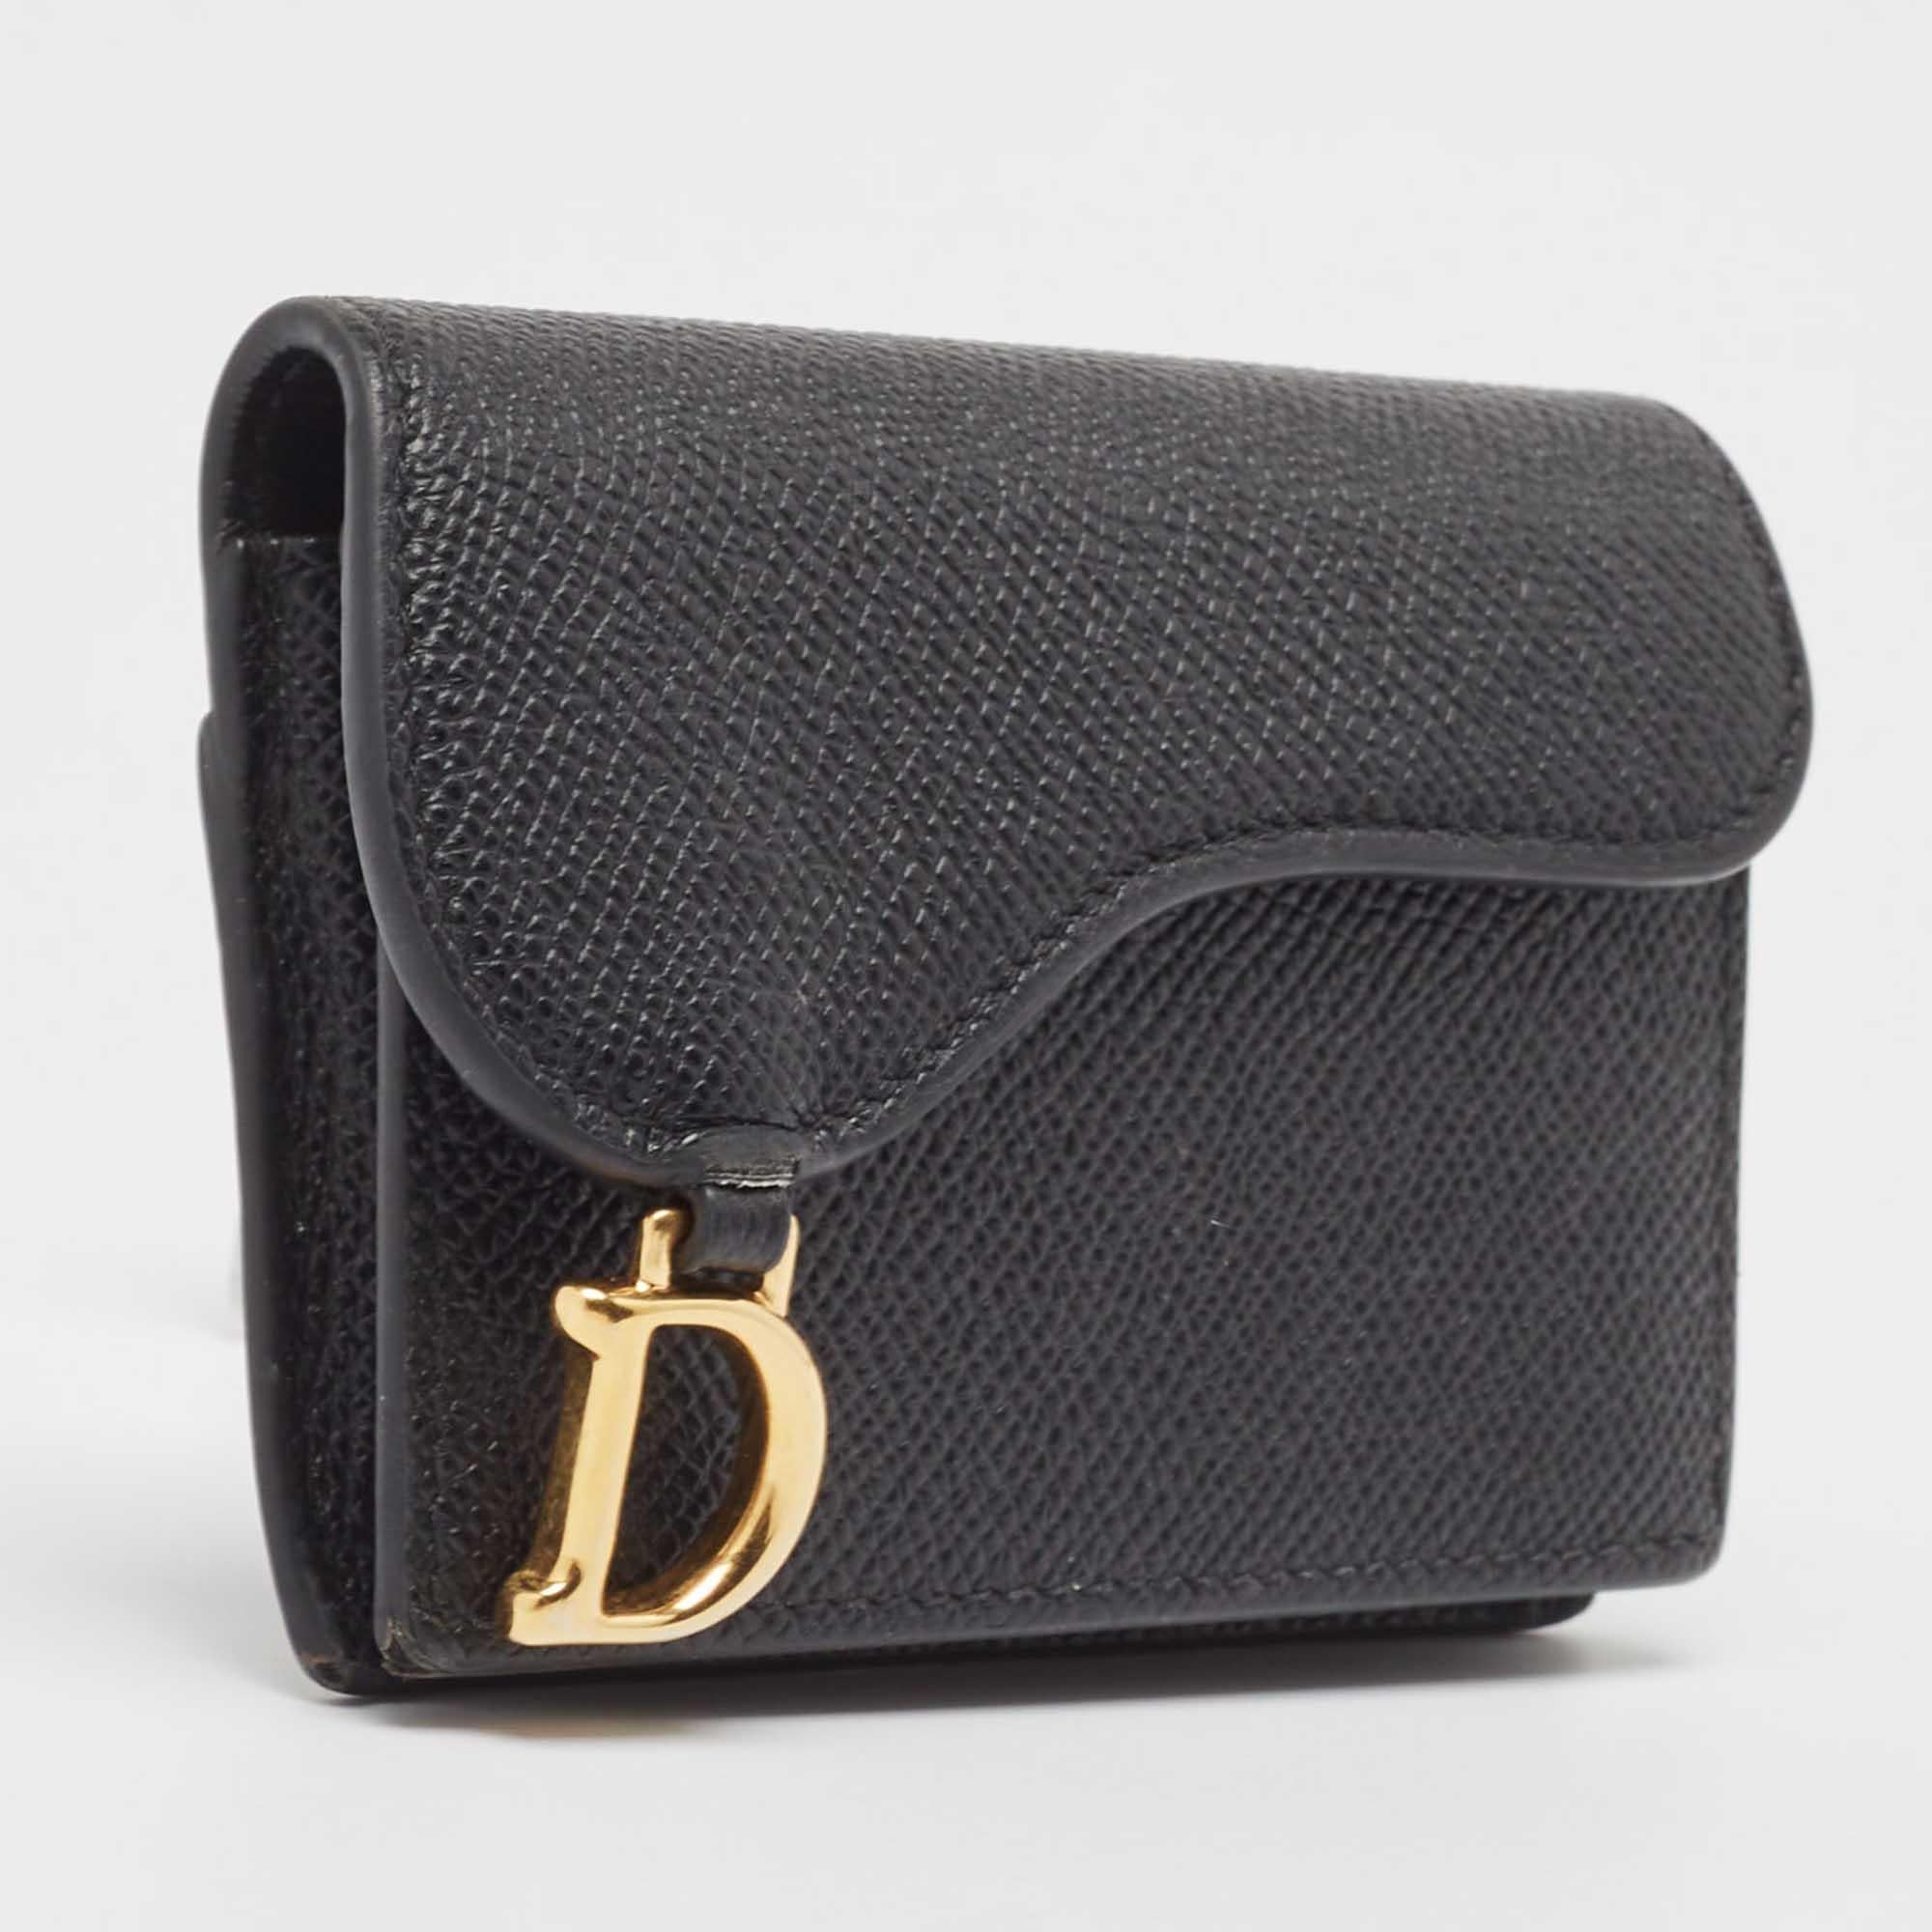 Crafted from leather in a black shade, the Dior card case comes with multiple compartments secured by a flap taken from the iconic Saddle bag. The creation is finished off with the D charm on the front.

